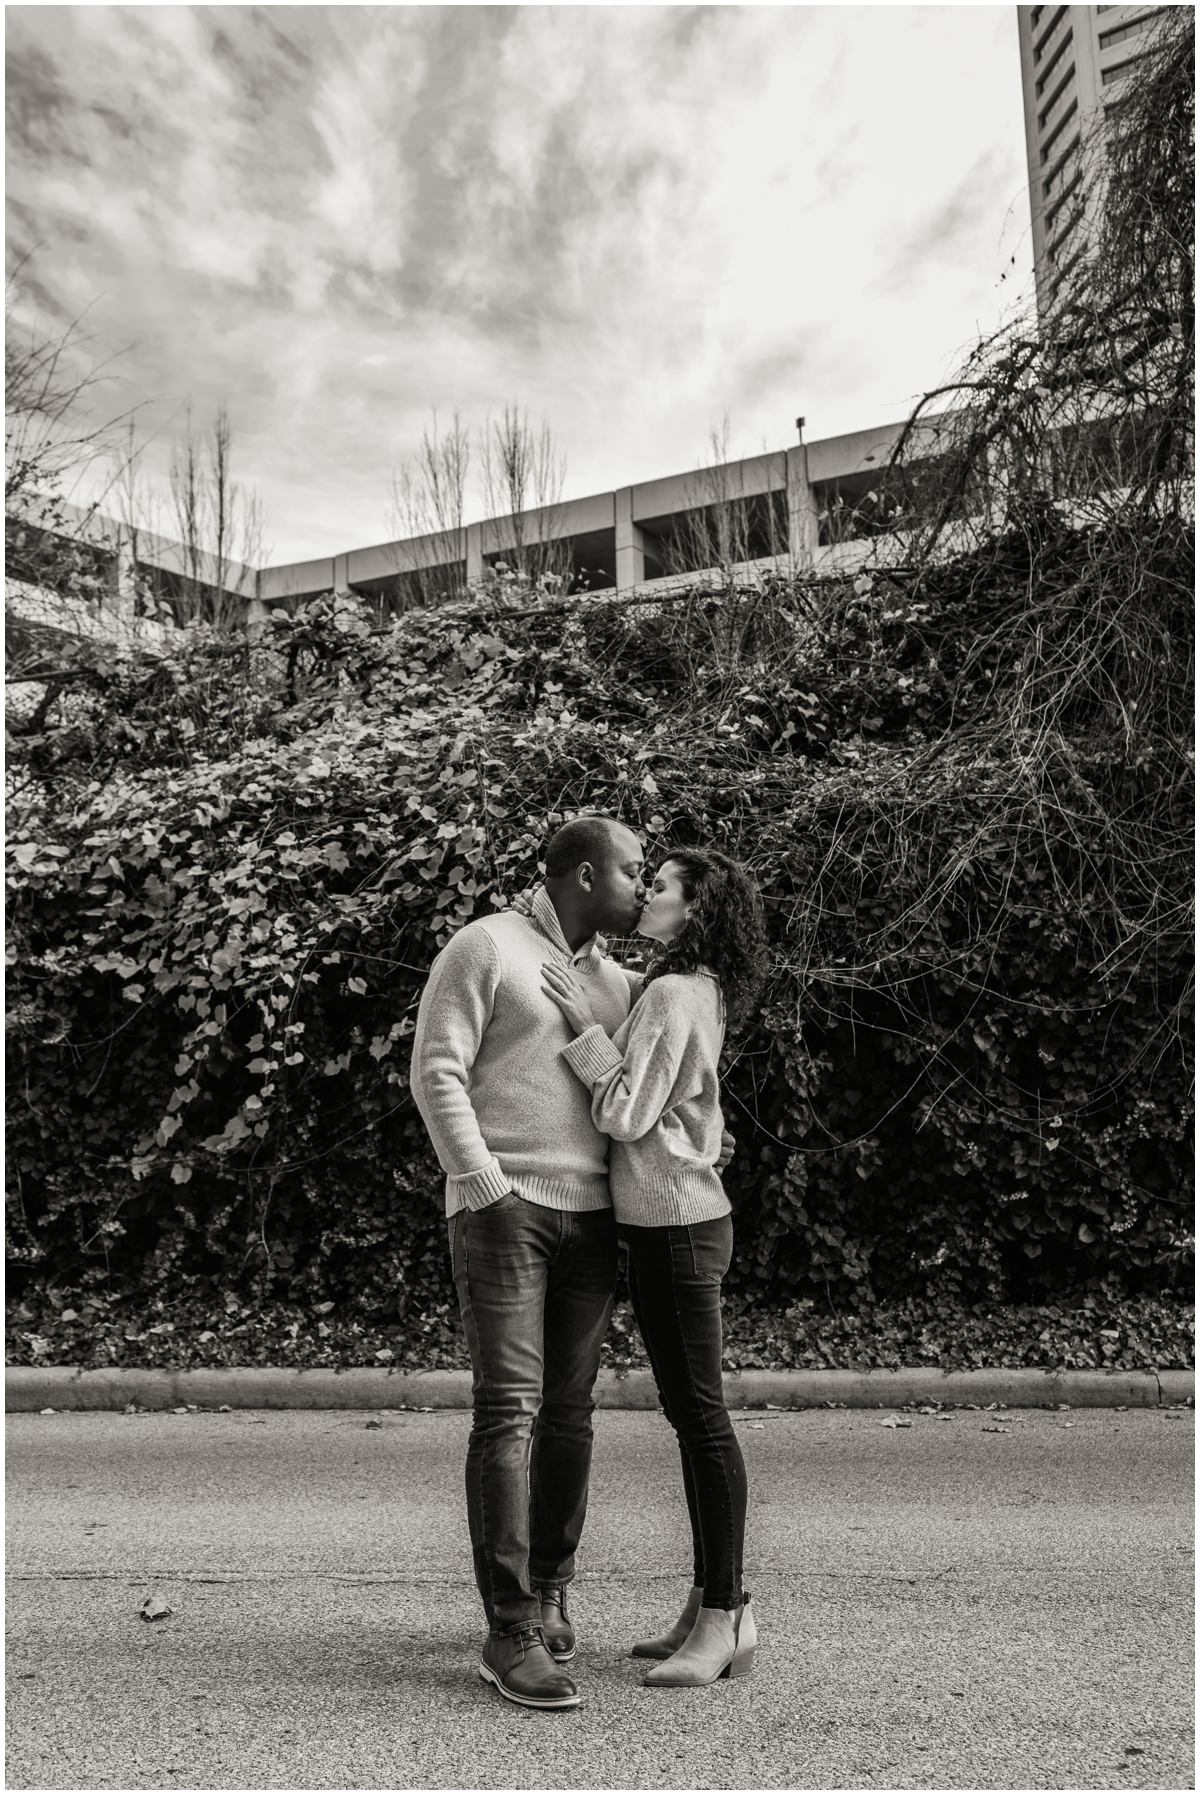 Adam Lowe Photography, Enagement Session, Engaged, Outdoor, Columbus, Ohio, Downtown, Love